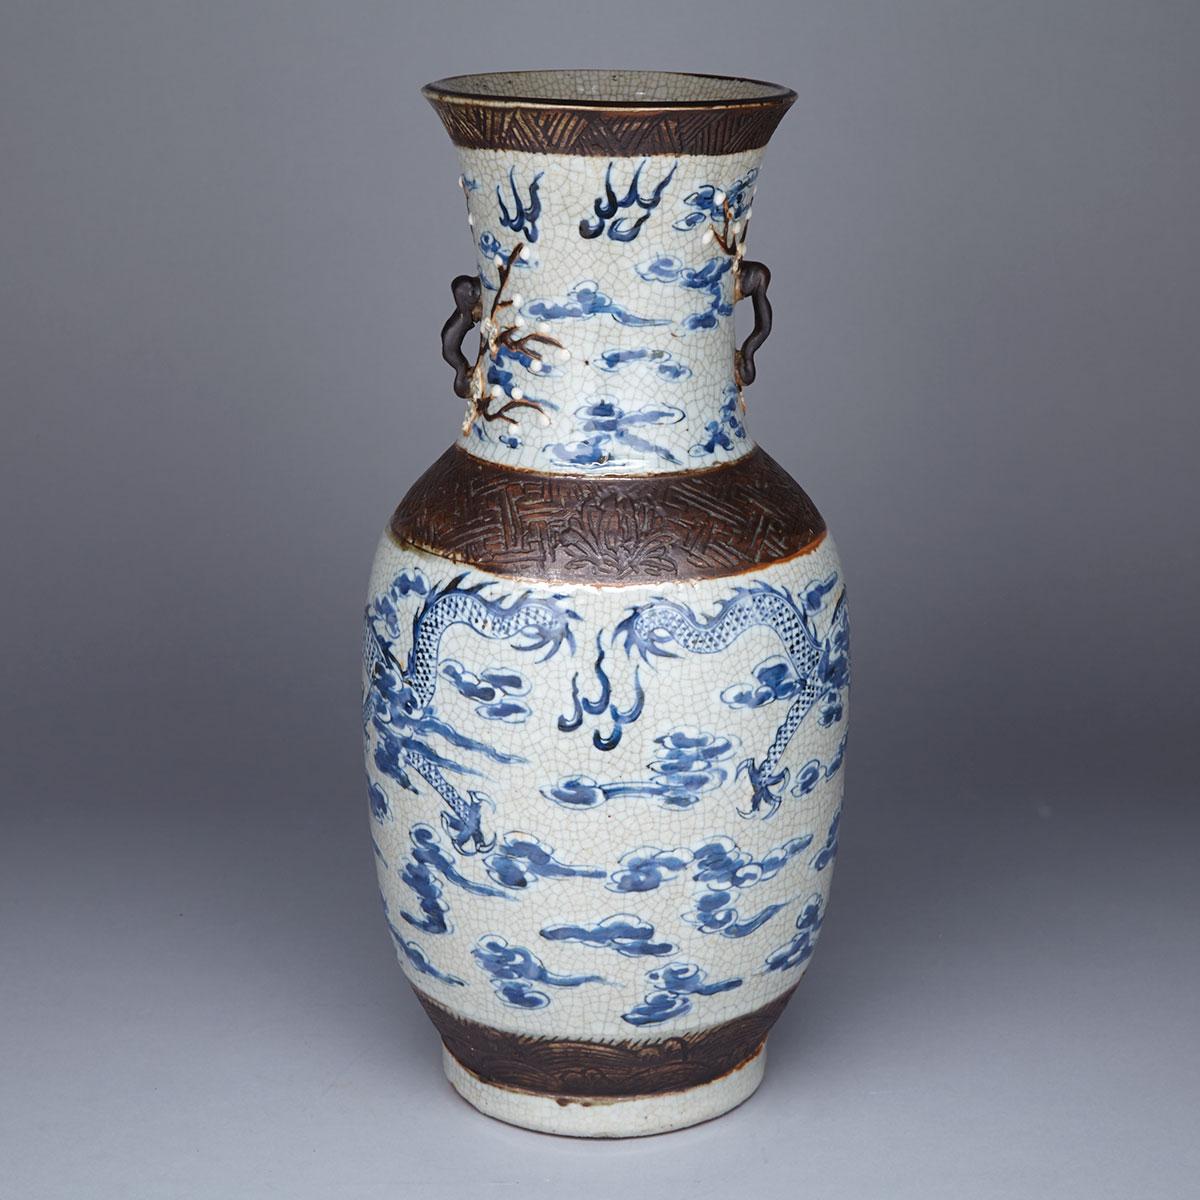 Blue and White Crackle Glazed Dragon Vase, Chenghua Mark, Early 19th Century